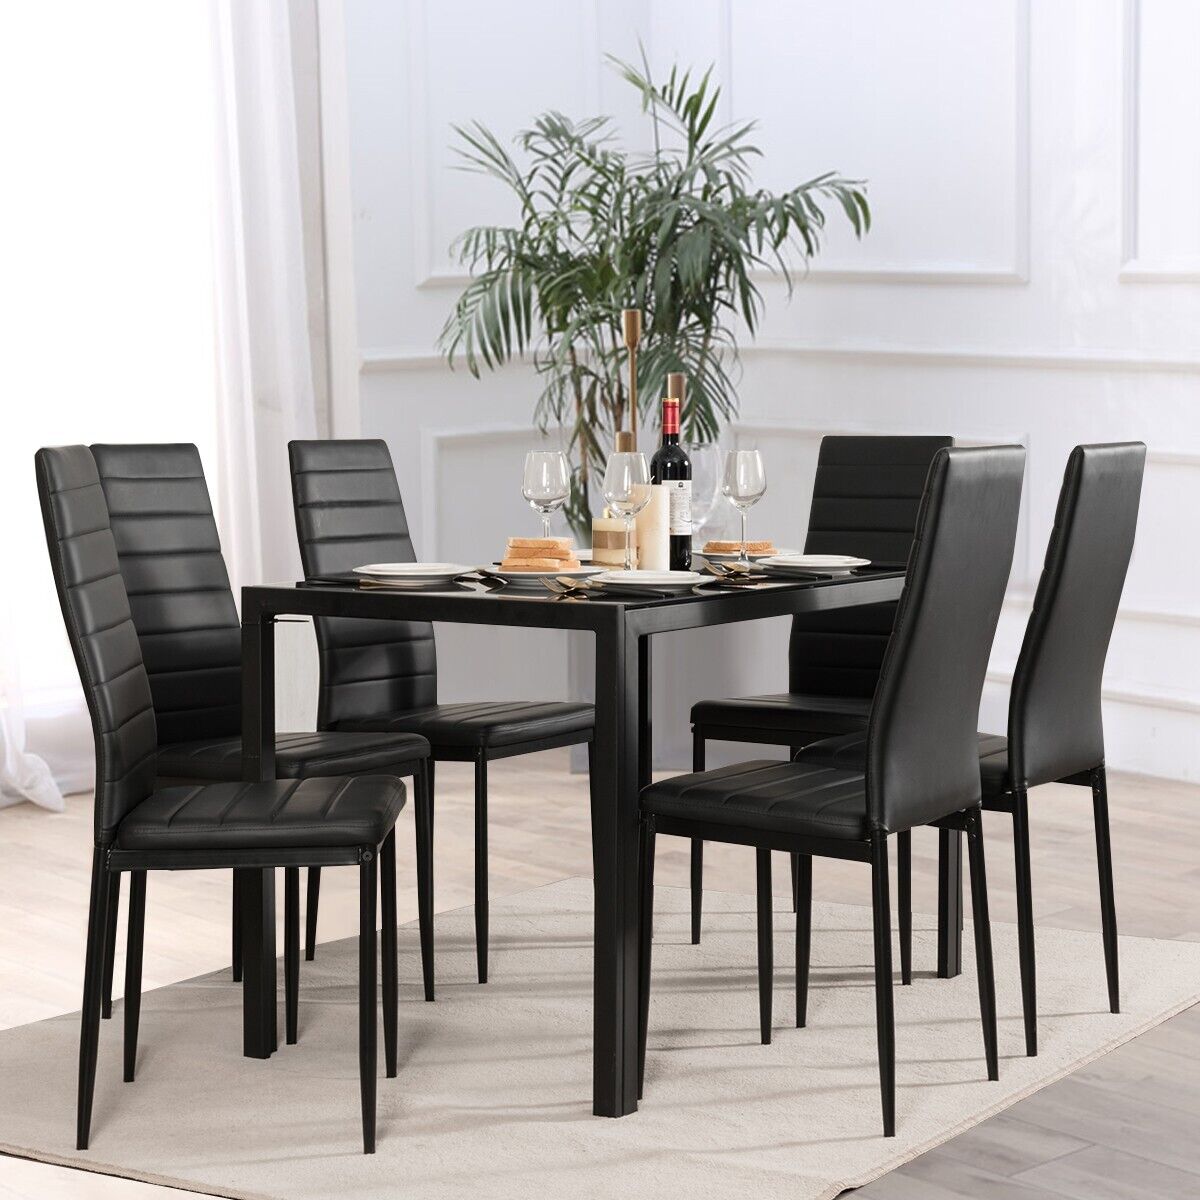 Set of 6 High Back Dining Chairs with Metal Legs and Foot Pads